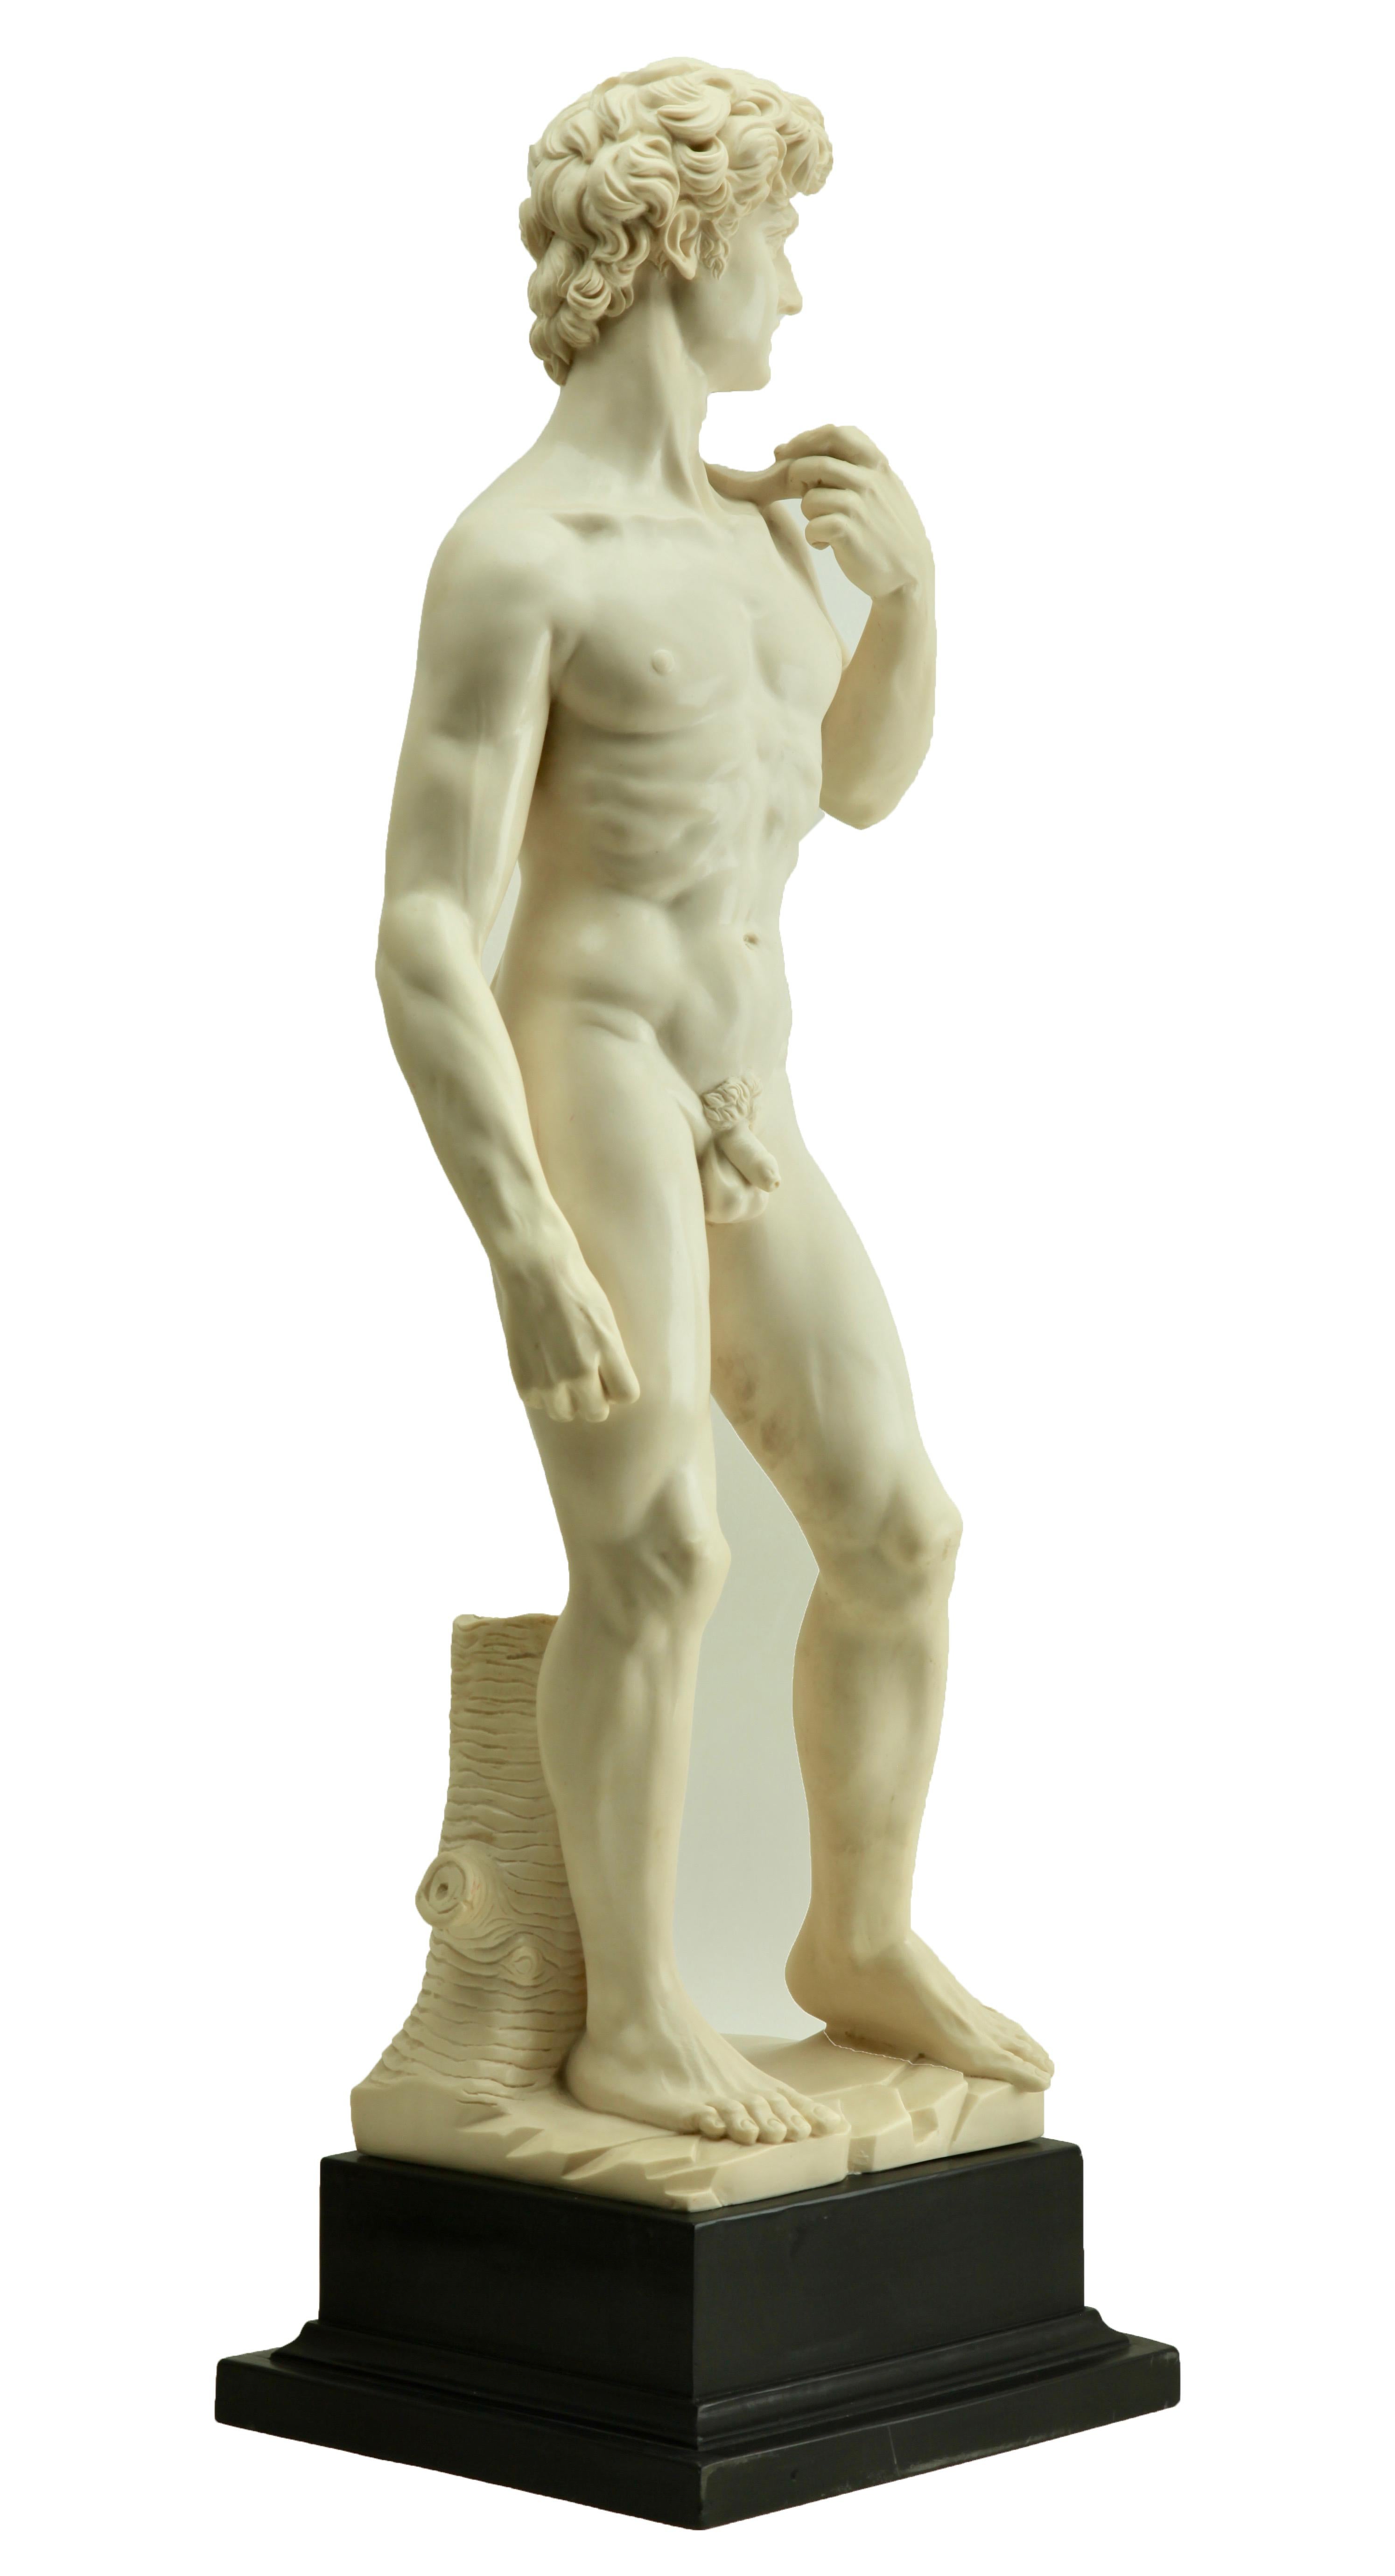 1975, Italy in good condition

Beautifully detailed and stylized image of Roman statue of the 'David' sculpted by G. Ruggeri.
Made from resin on marble base.
The statue is in good condition with a nice age patina. 

Gino Ruggeri, one of the